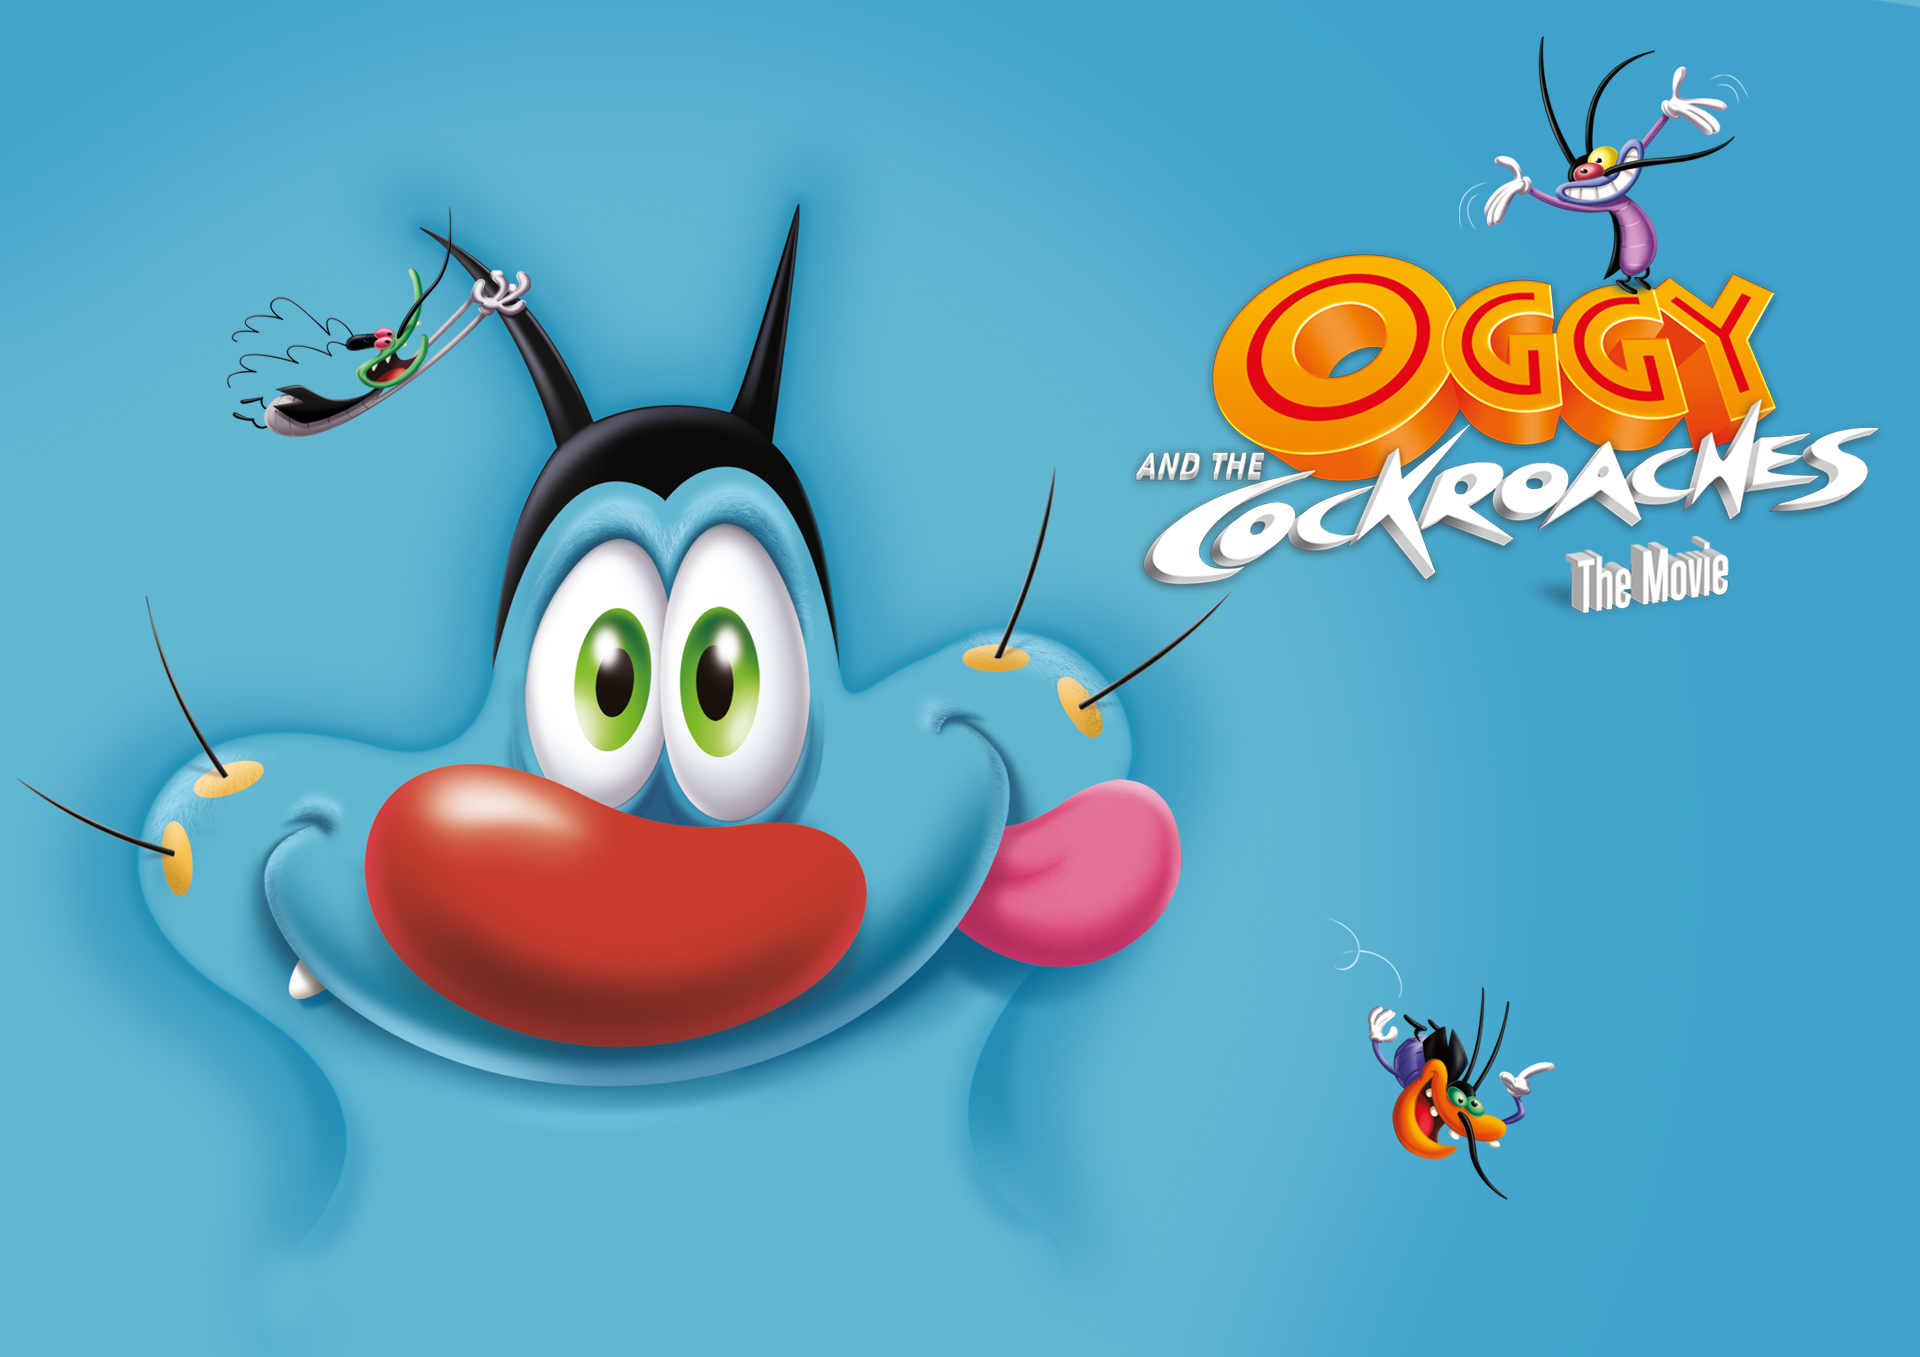 Oggy and the Cockroaches: The Movie / Oggy and the Cockroaches: The Movie (2013)